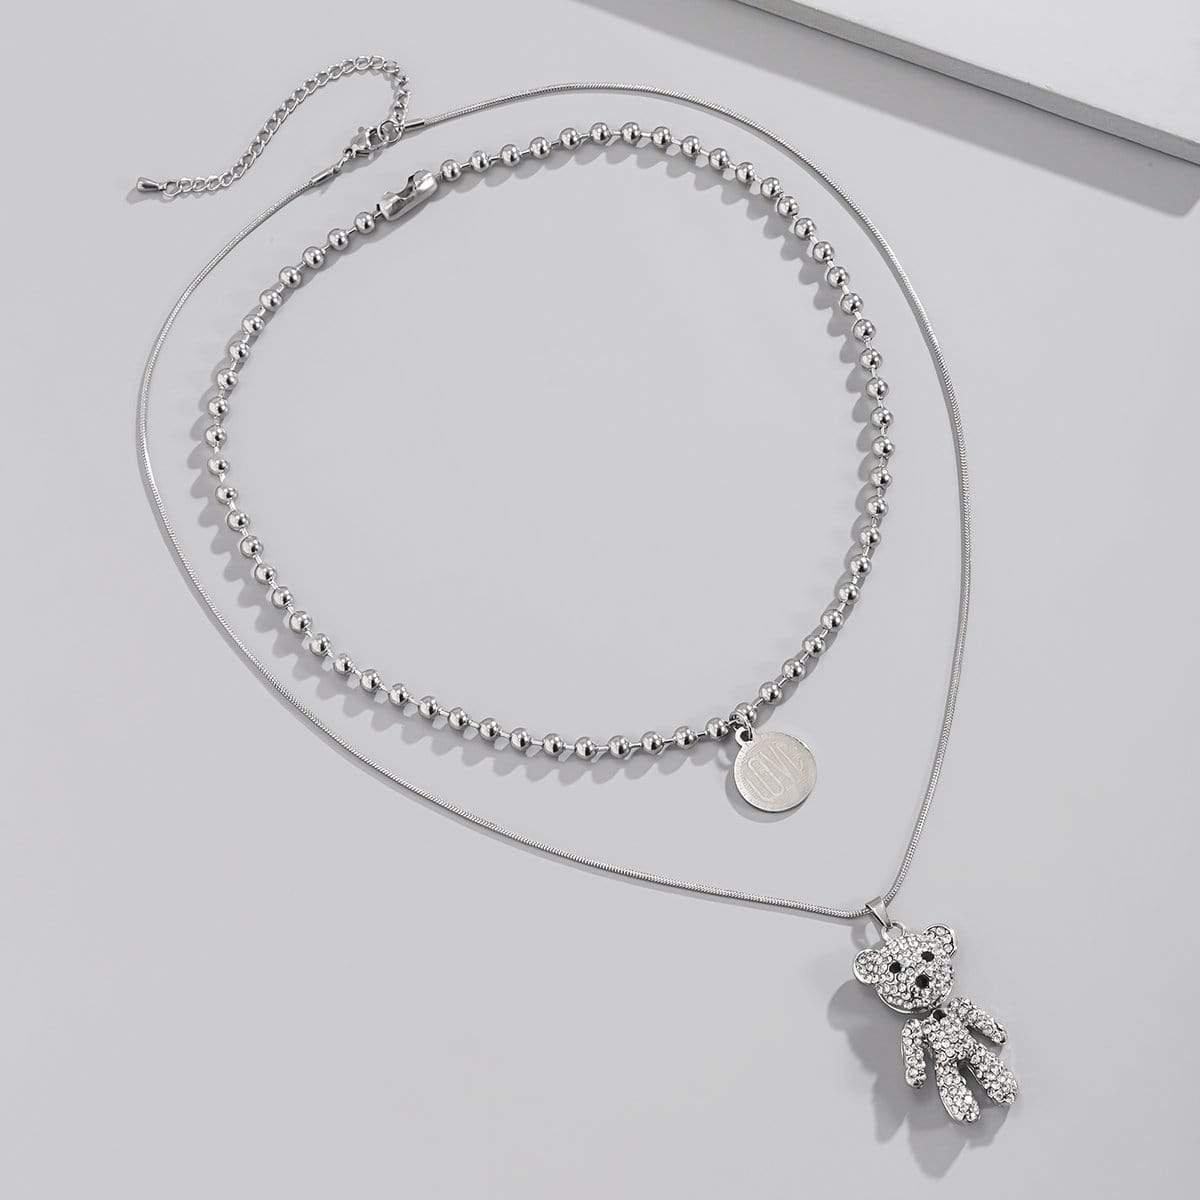 Stainless Steel Layered Crystal Bear & Coin Pendant Beaded Choker Necklace Set